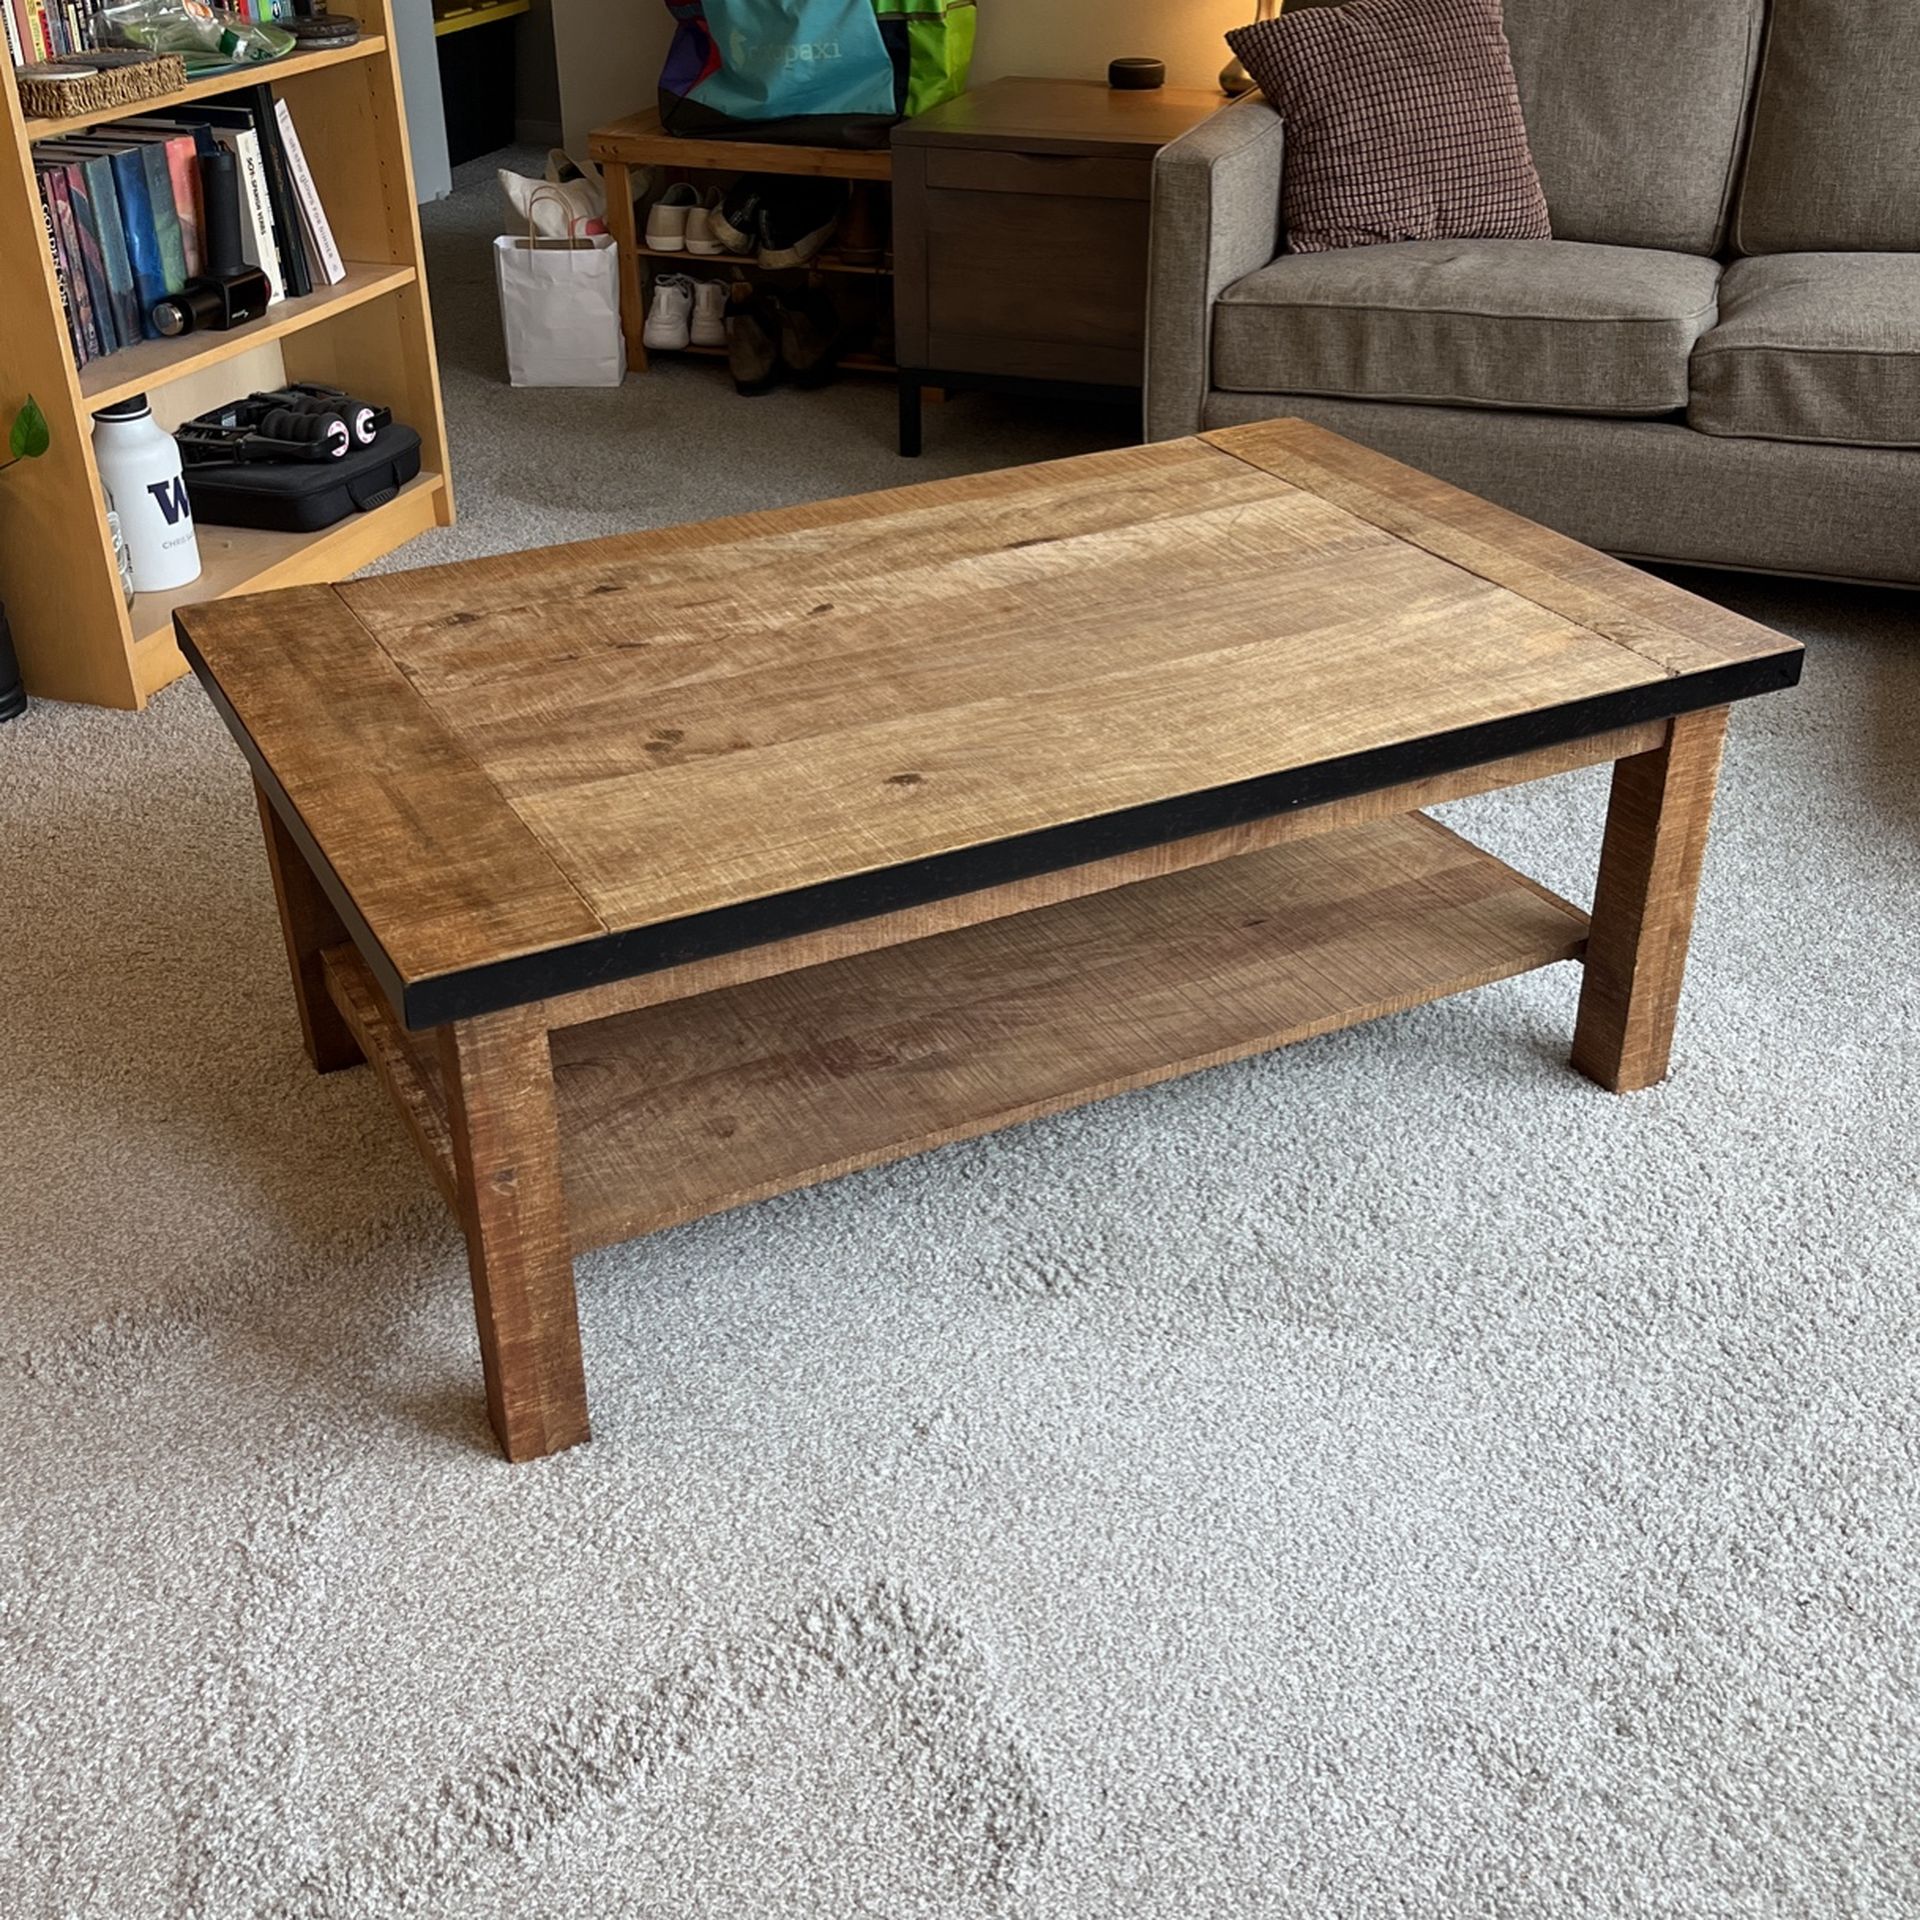 Rustic / Industrial-style Coffee Table